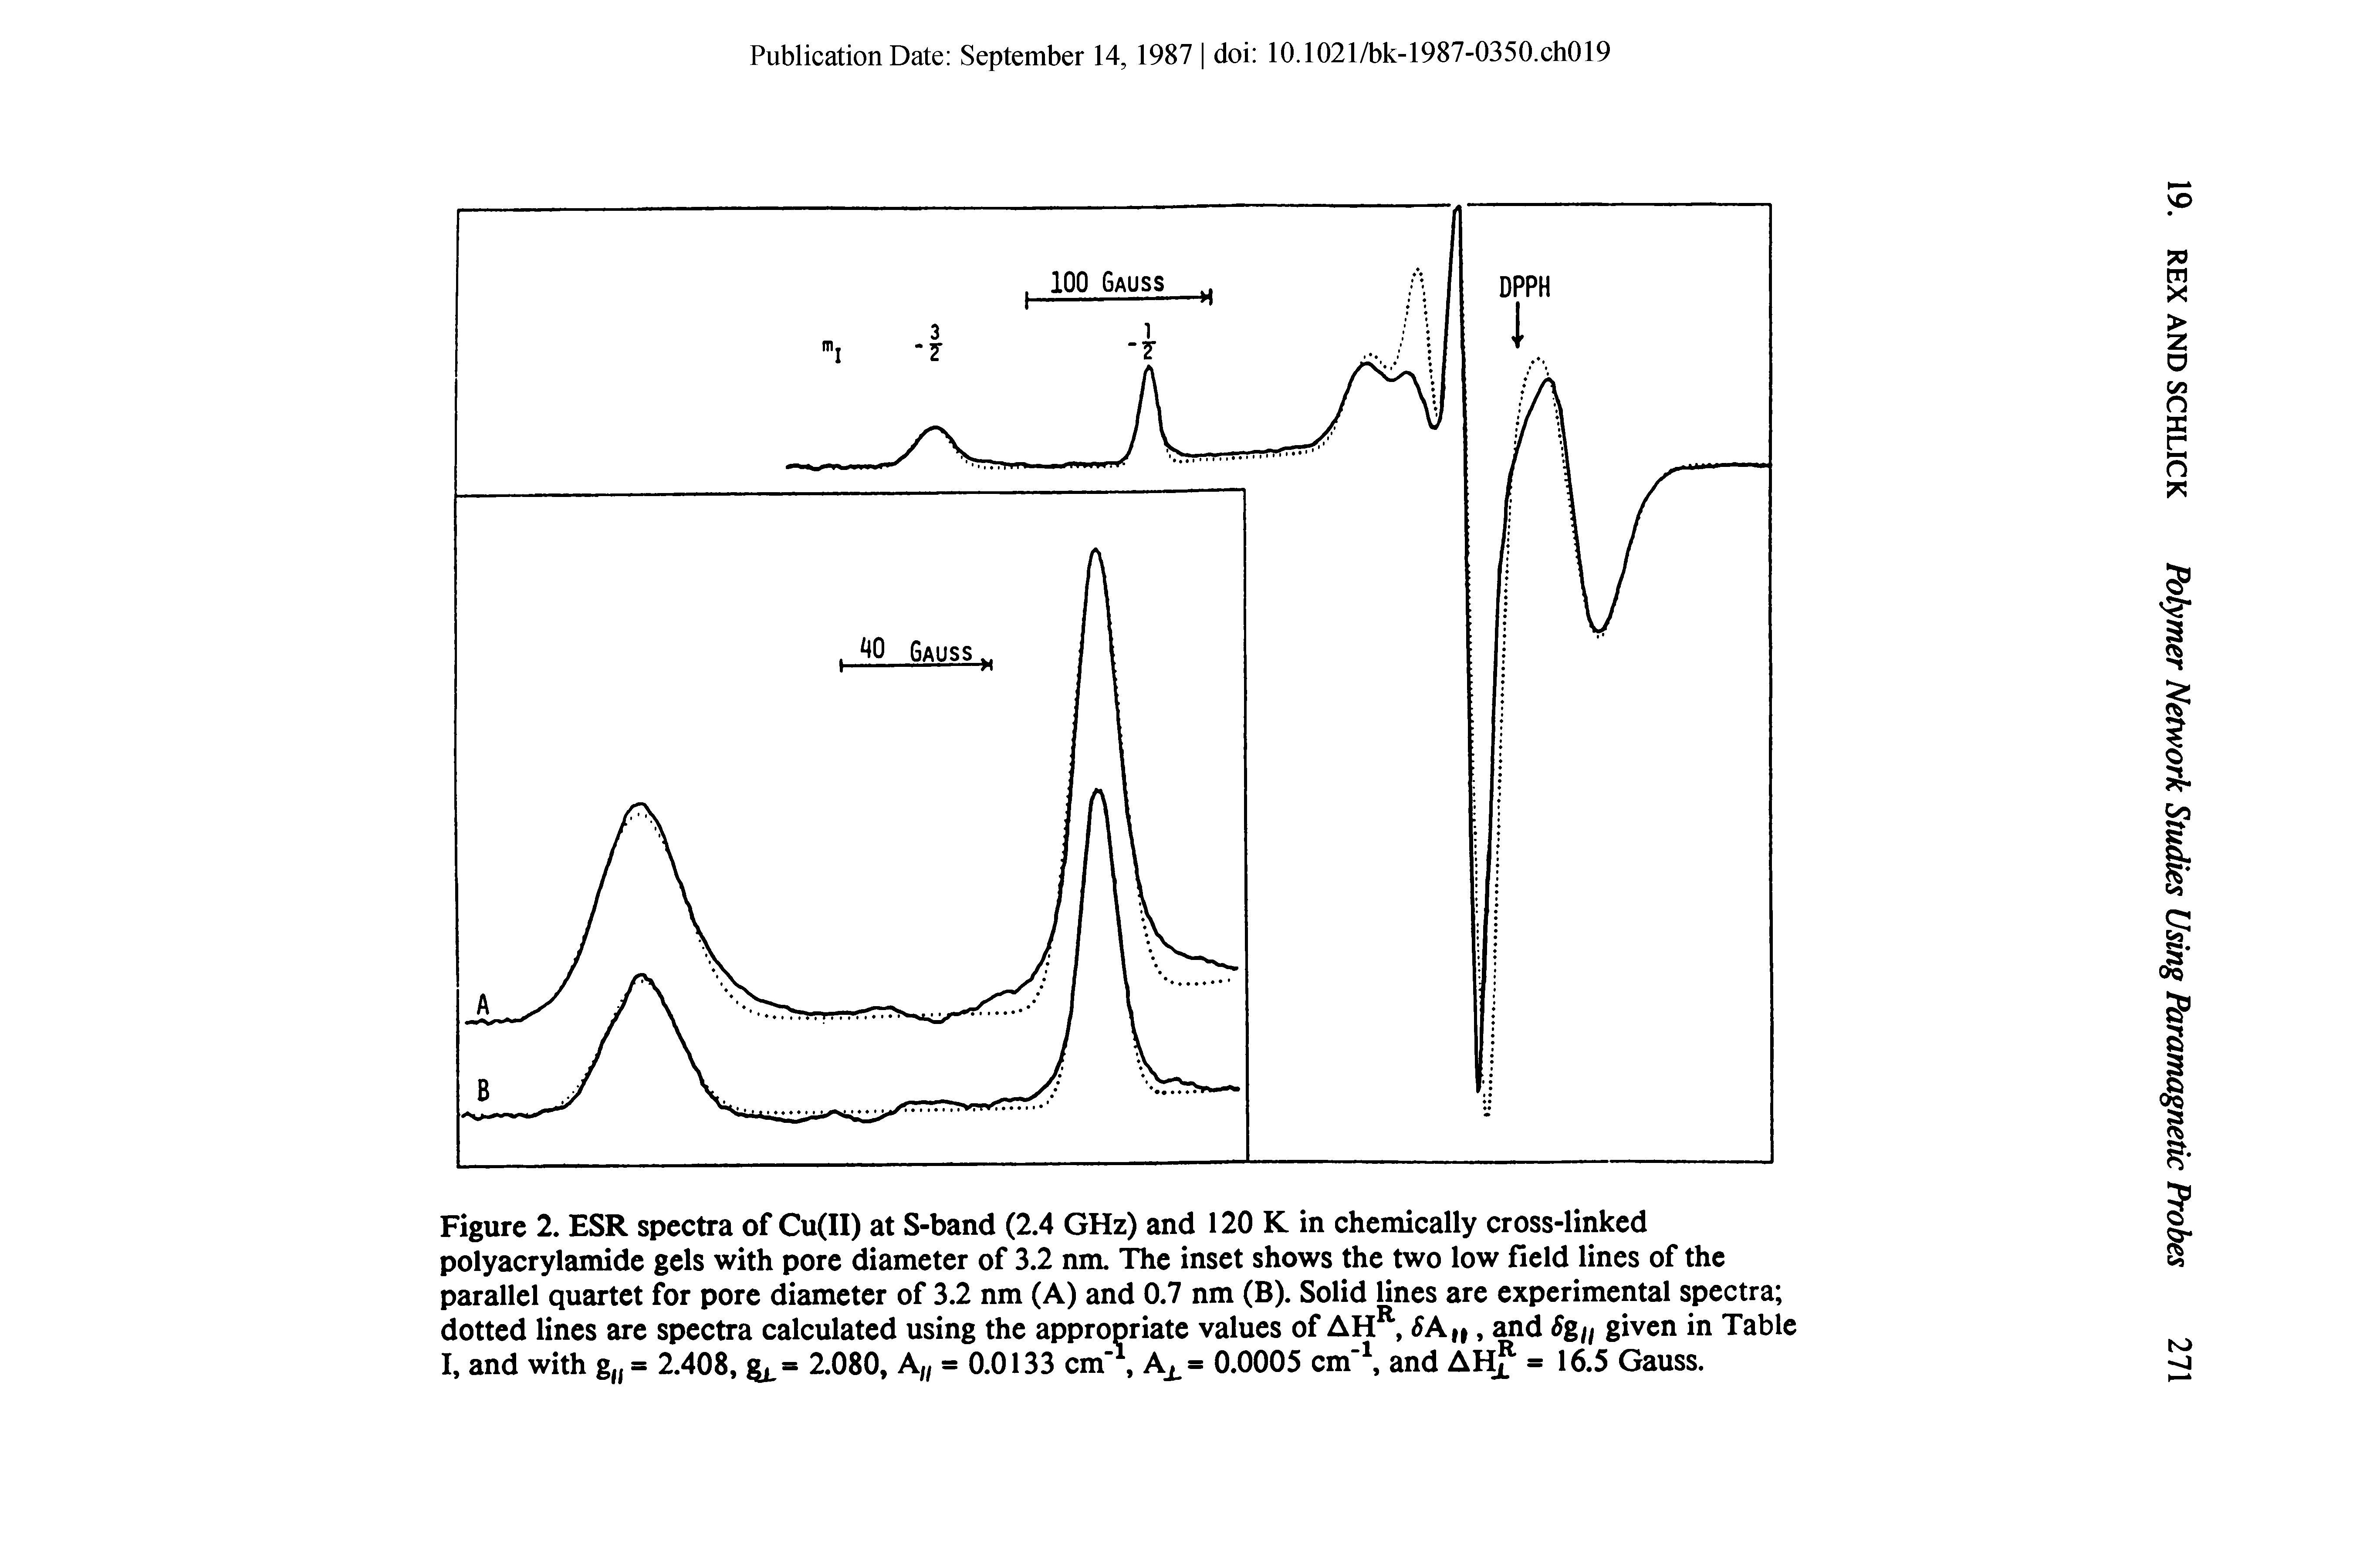 Figure 2. ESR spectra of Cu(II) at S-band (2.4 GHz) and 120 K in chemically cross-linked polyacrylamide gels with pore diameter of 3.2 nm. TTie inset shows the two low field lines of the parallel quartet for pore diameter of 3.2 nm (A) and 0.7 nm (B). Solid lines are experimental spectra dotted lines are spectra calculated using the appropriate values of AH, SAn, and Sgn given in Table I, and with g = 2.408, 2.080, A, = 0.0133 cm, A = 0.0005 cm and AHf = 16.5 Gauss.